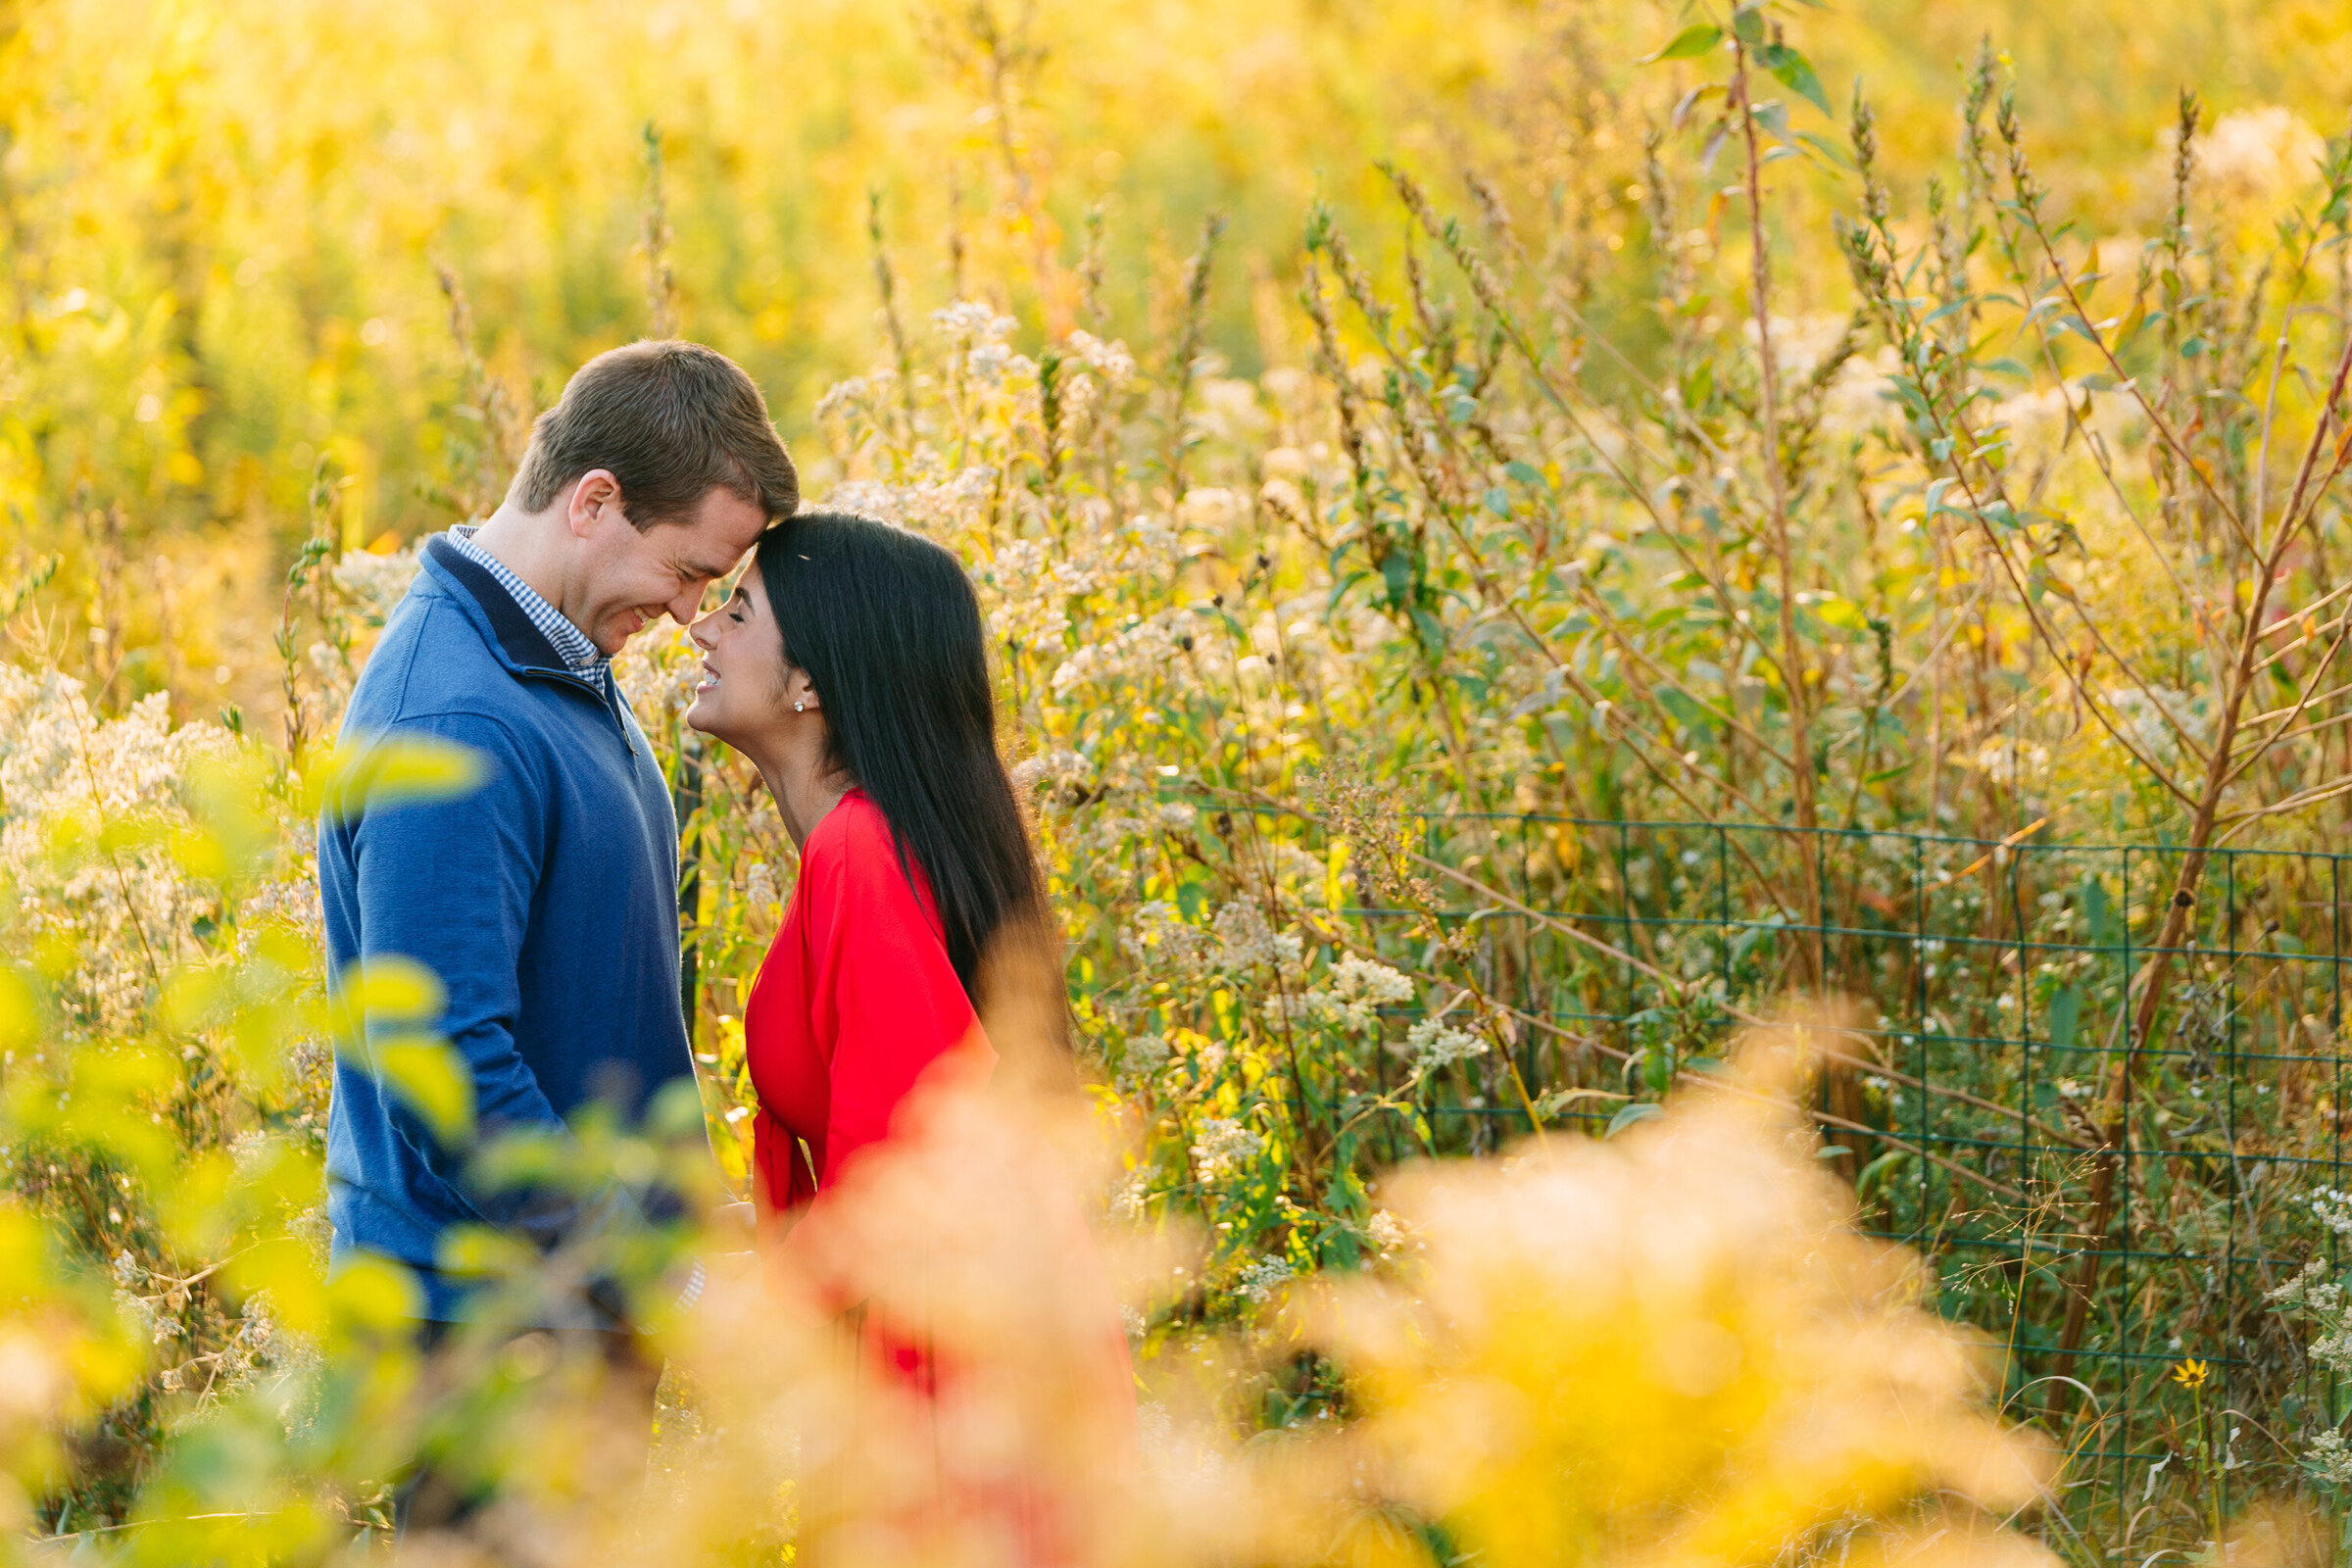 Engagement session in Lincoln Park, Chicago